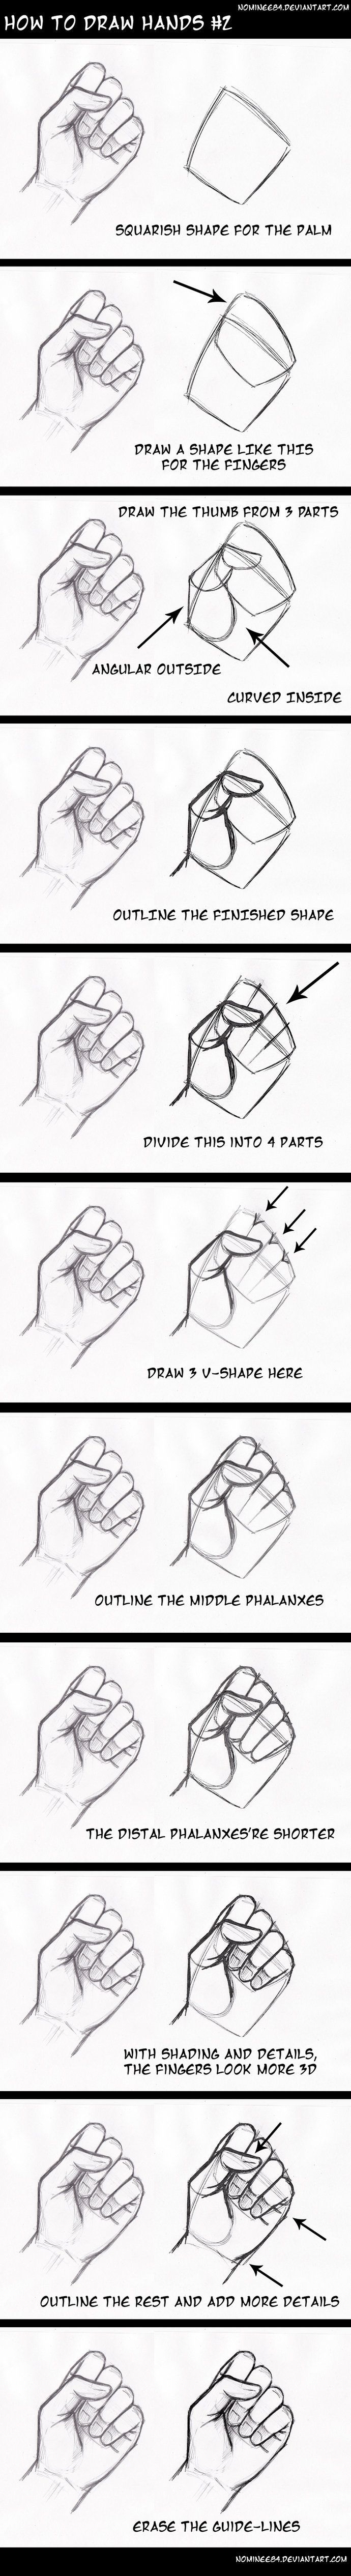 really helpgul breakdown of the hand. i personally am terrible at draweing ahnds s